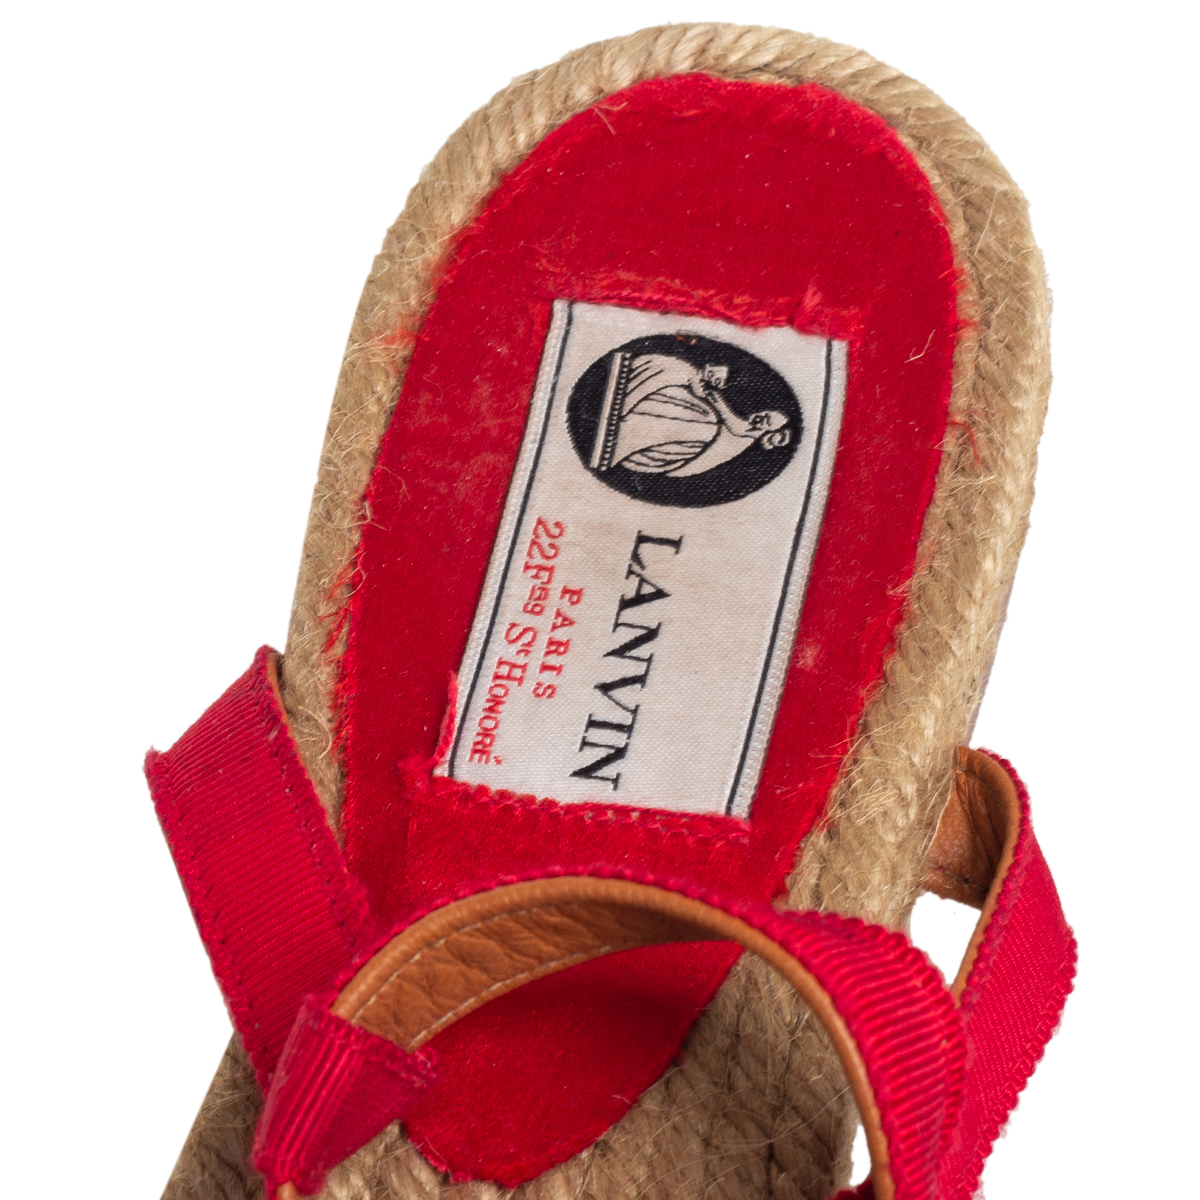 Lanvin Red Leather And Satin Bow Espadrille Thong Flat Sandals Size 39